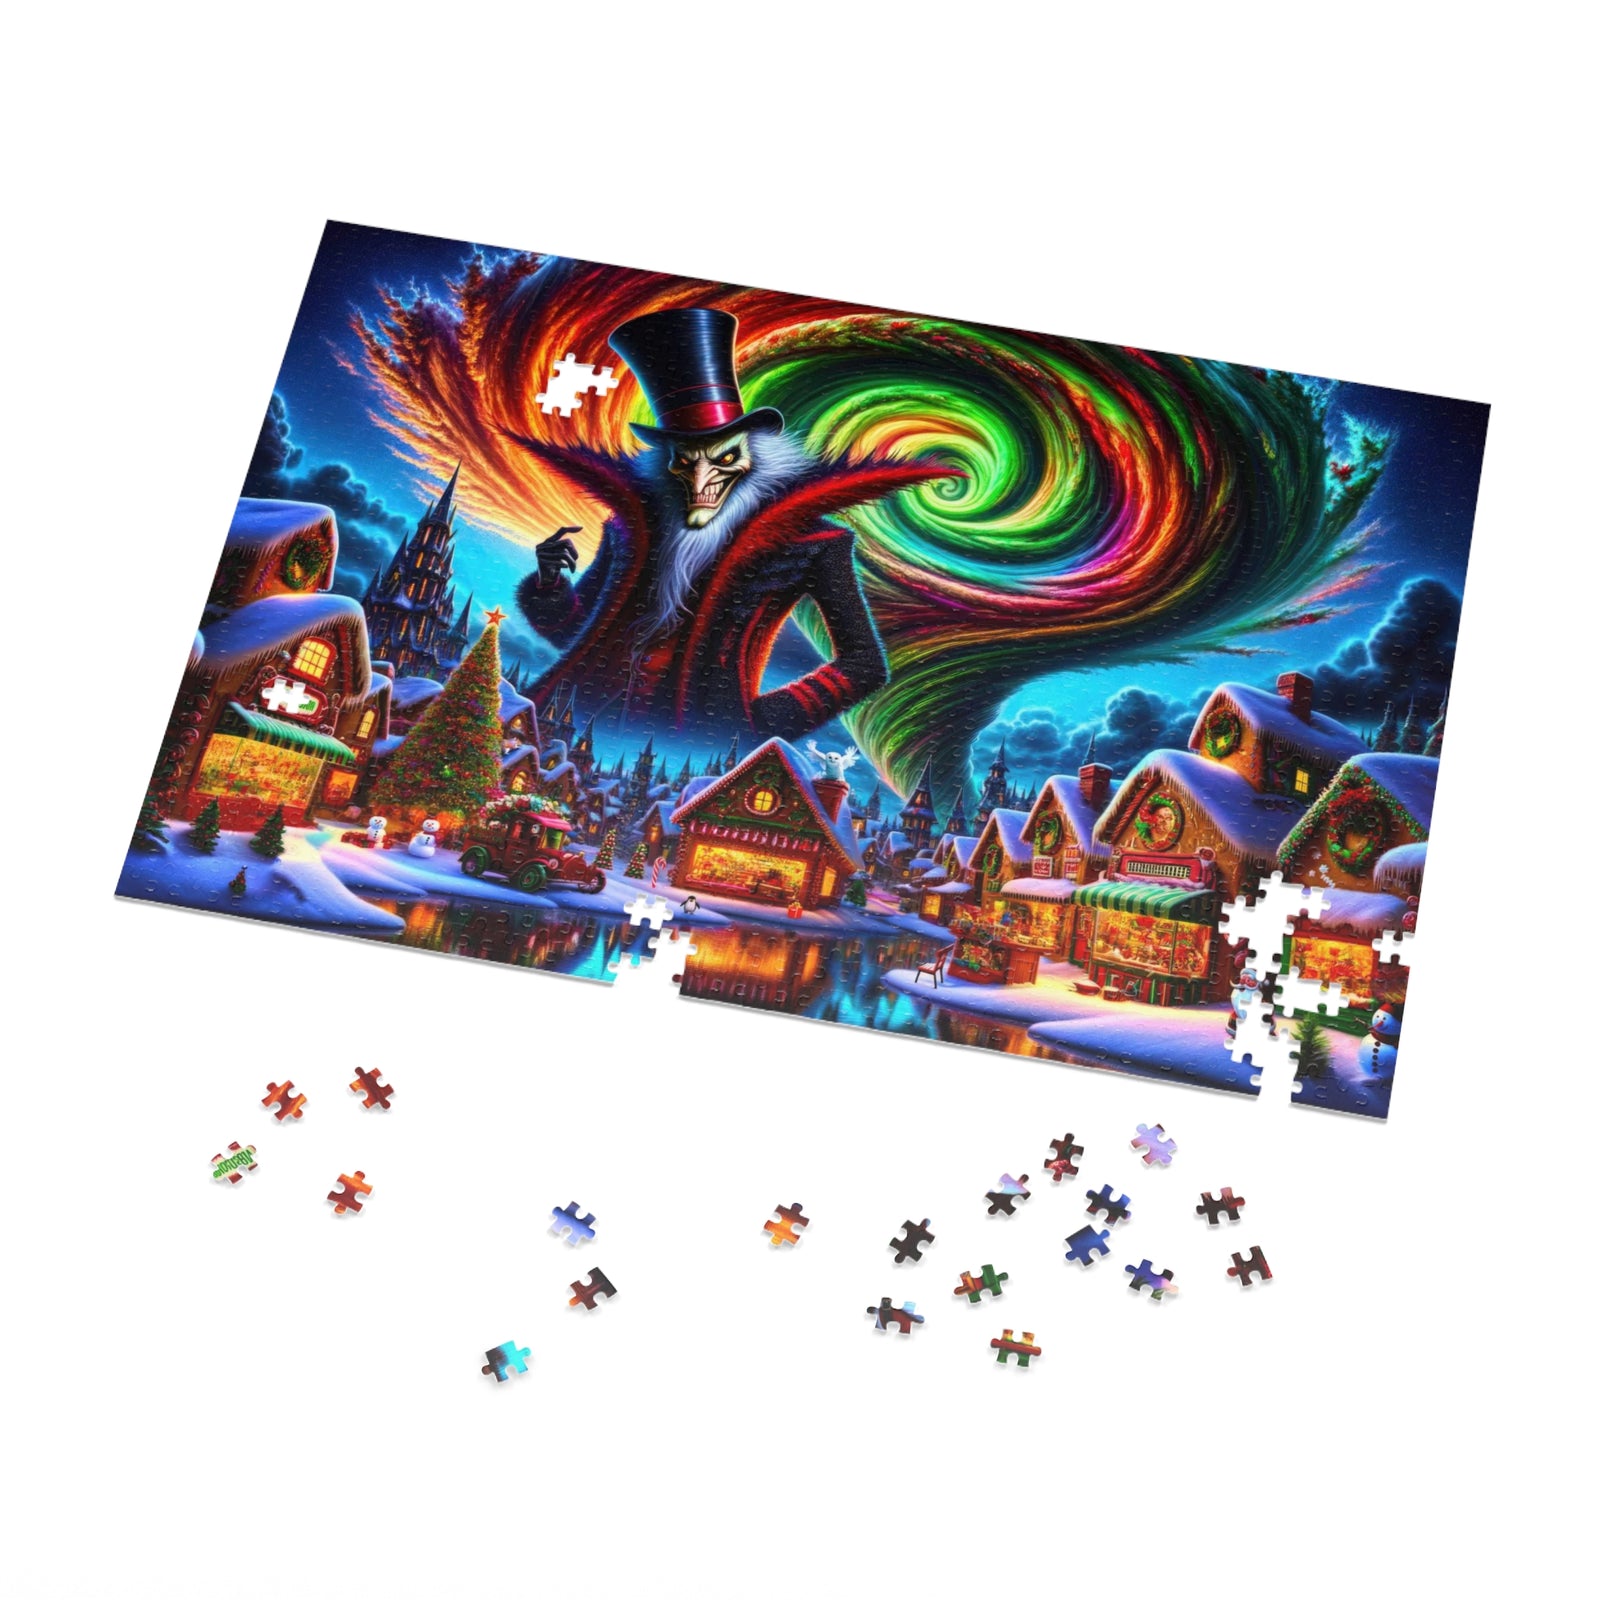 Yuletide Chaos Jigsaw Puzzle